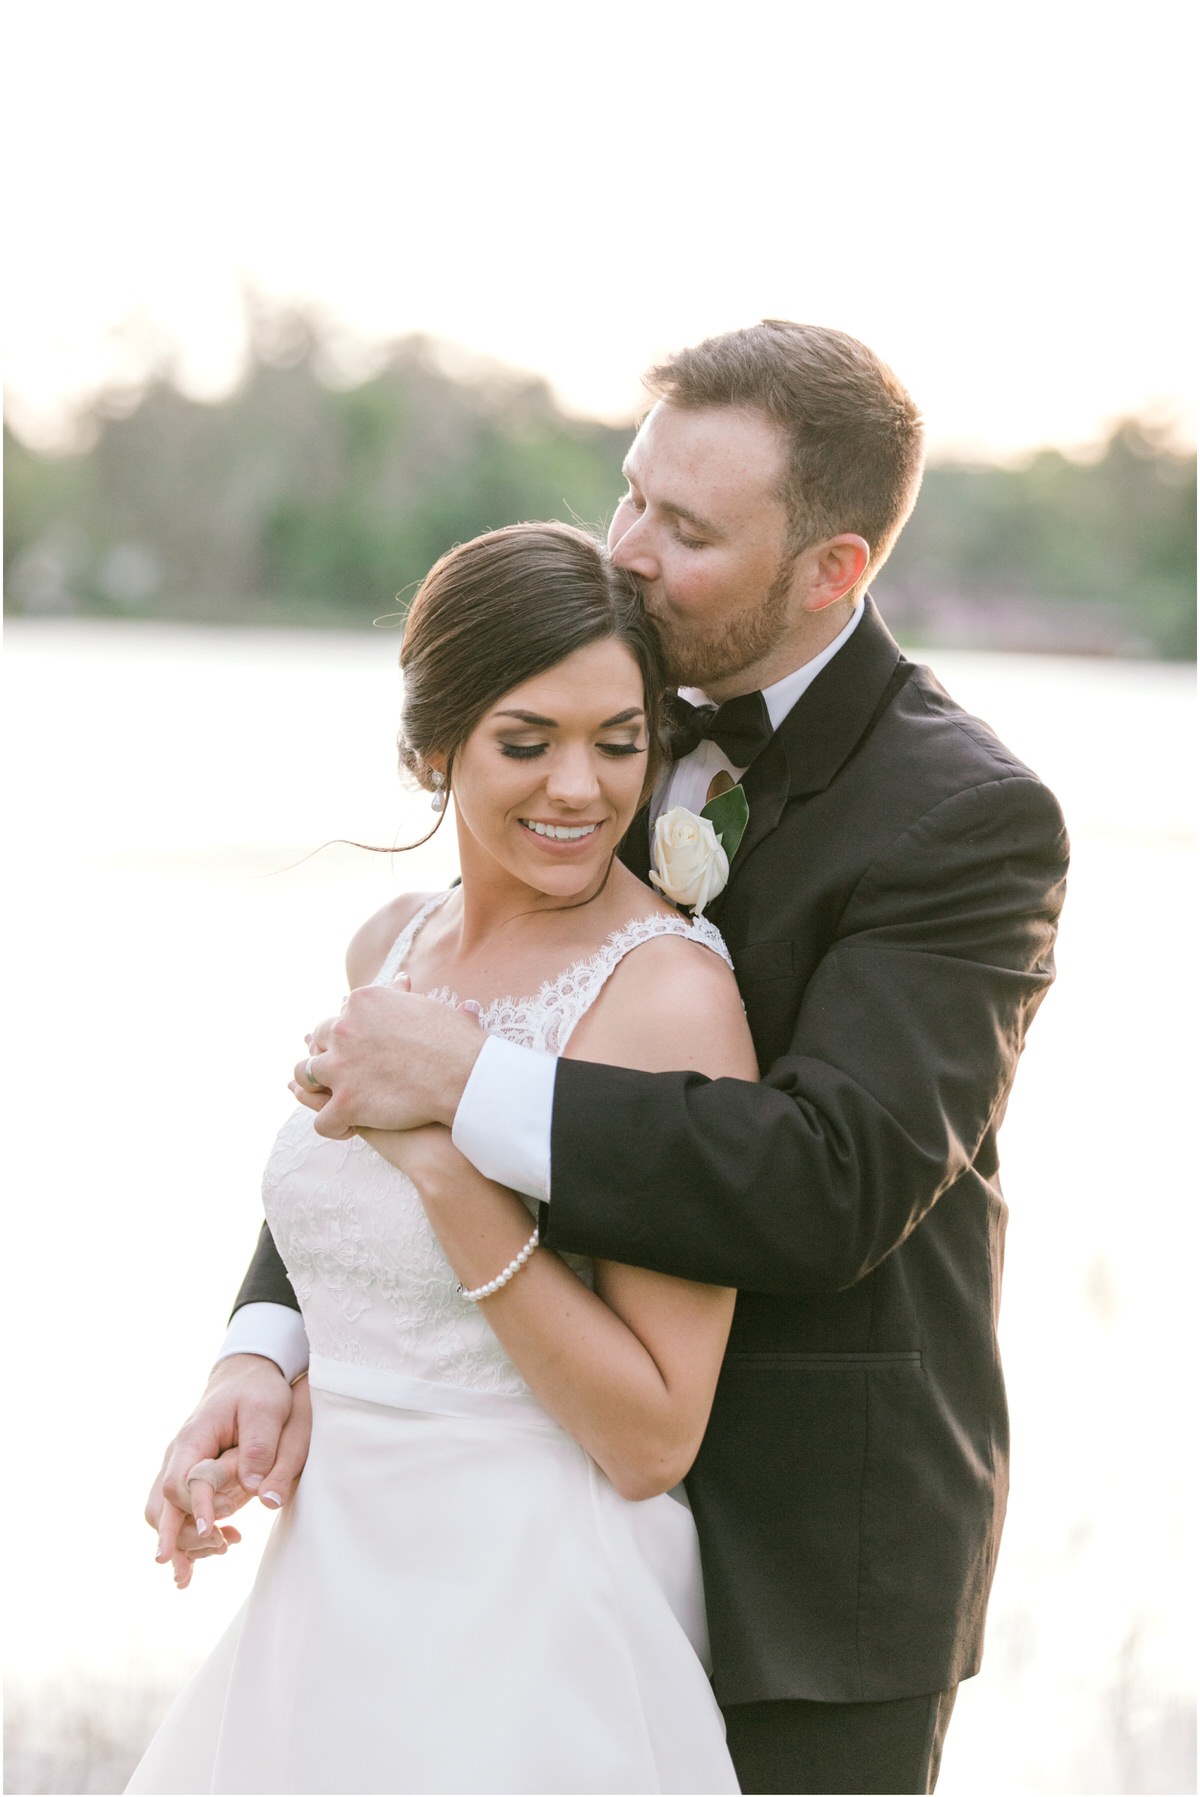 Bride and groom by the lake at sunset for their citrus inspired Florida wedding.